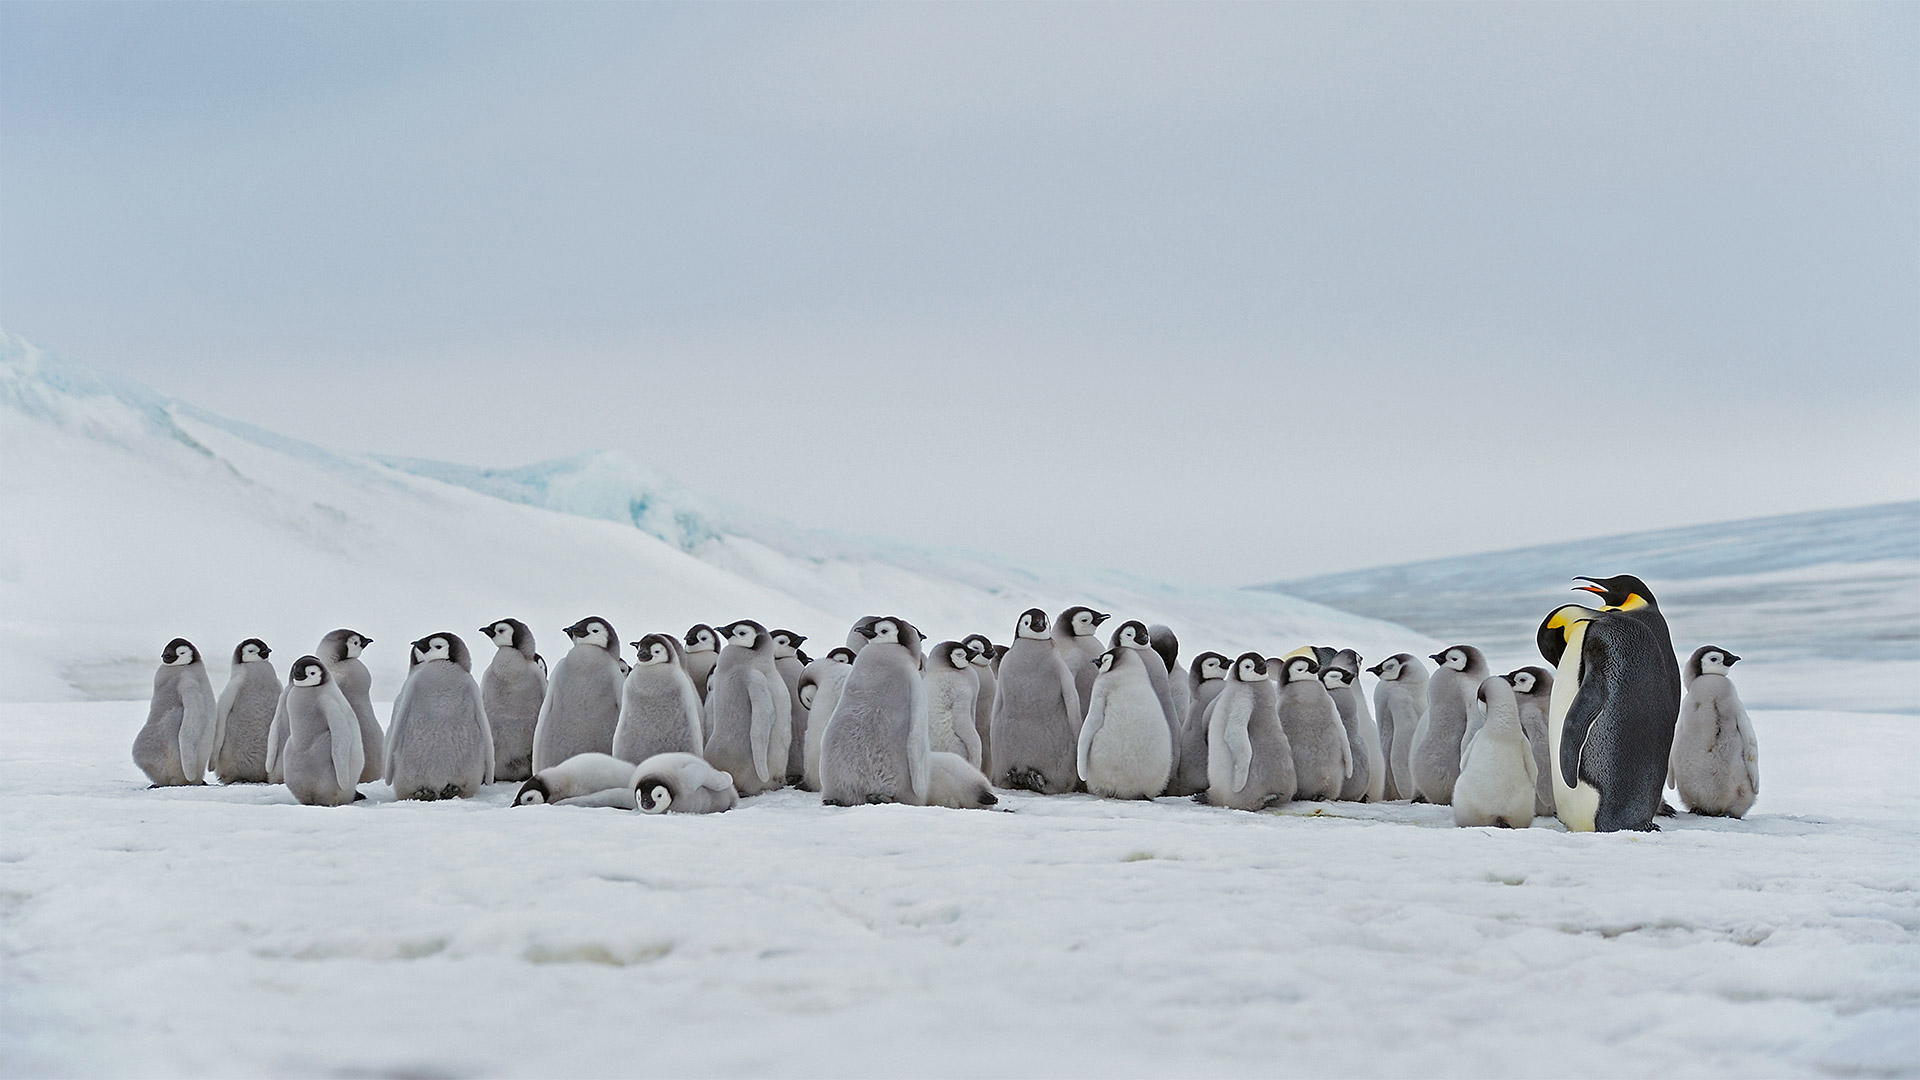 Emperor penguin adults and chicks at the Snow Hill Island rookery, Antarctica - Martin Ruegner/Getty Images)